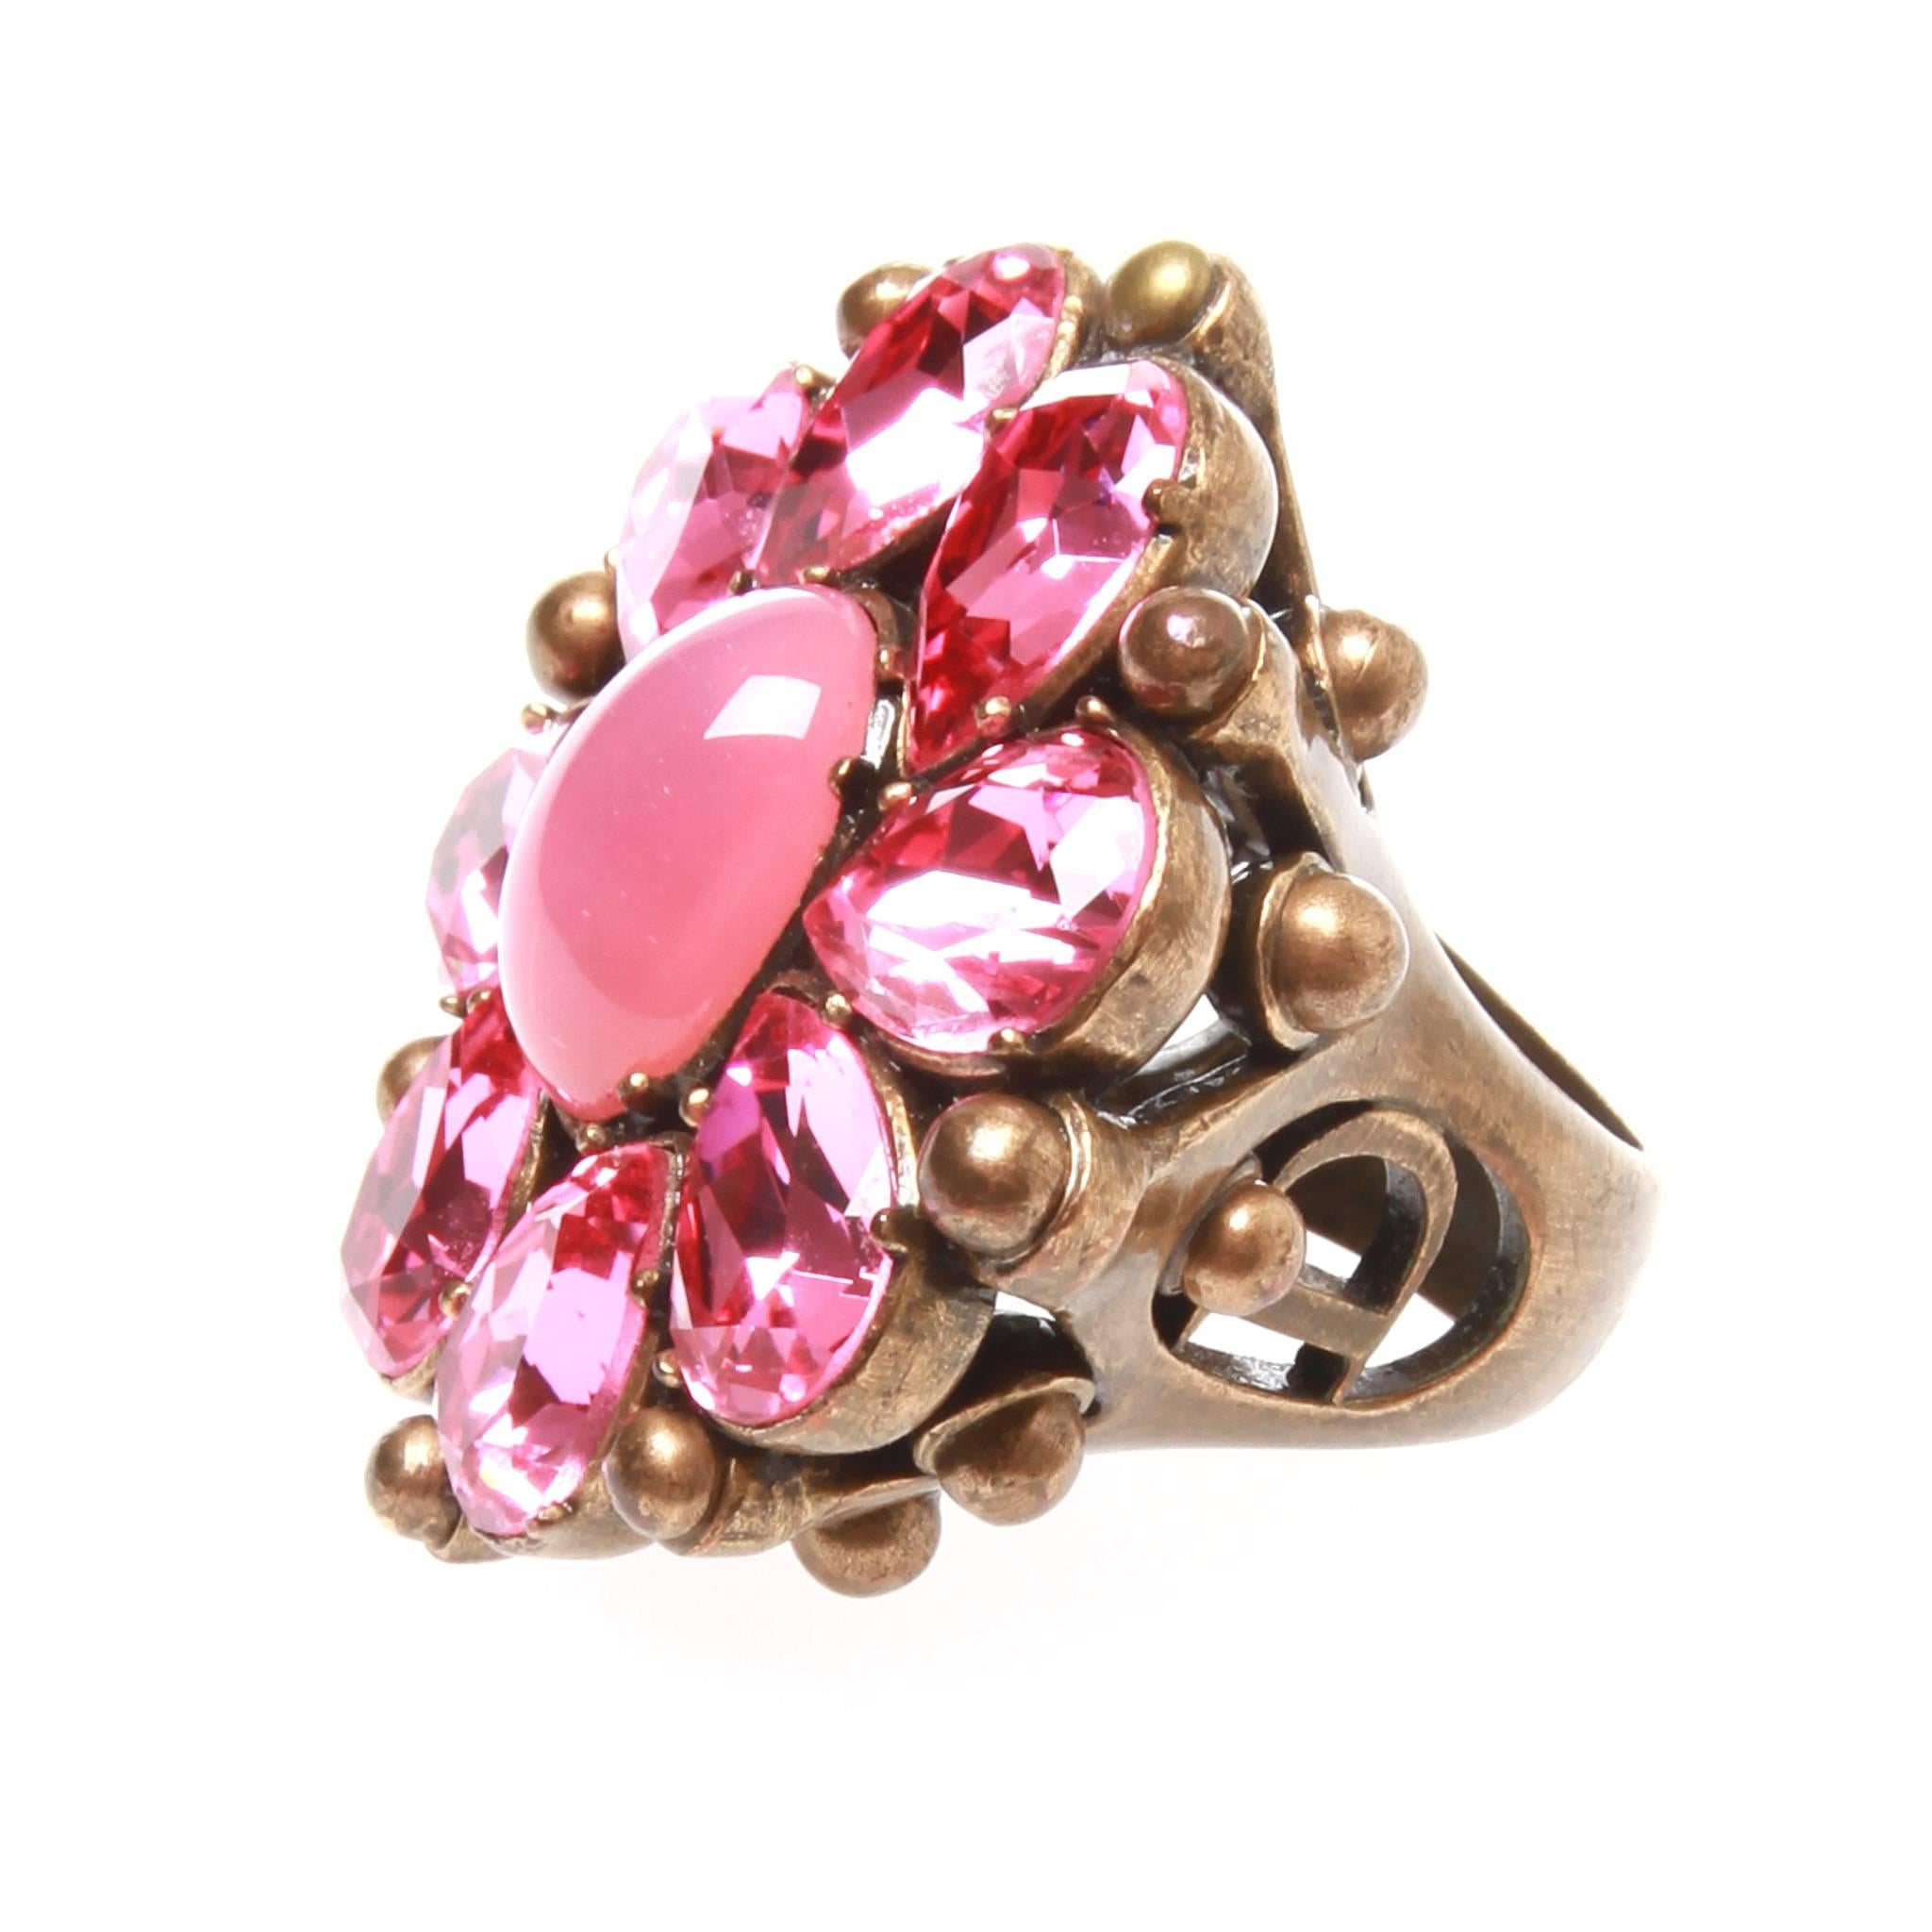 Absolutely stunning cocktail ring featuring pink rhinestones and an iridescent pink faux moonstone cabochon in the center with bronze brass setting and signature 